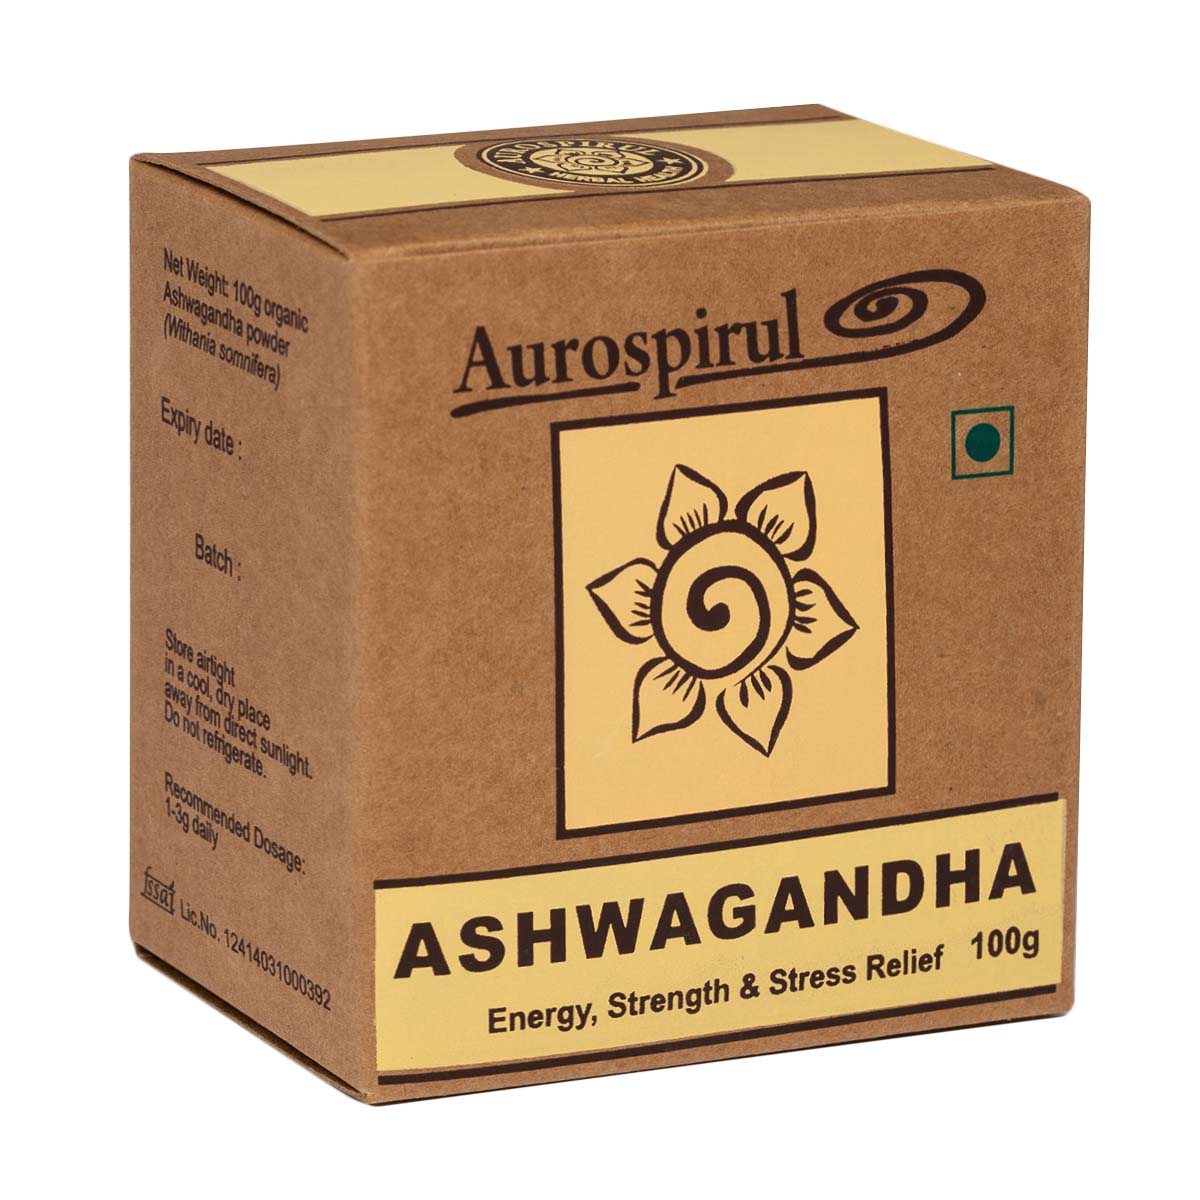 Aurospirul Ashwagandha Powder | Auroville | Raw Living UK | Herbs | Super Foods | Supplements | Aurospirul&#39;s High Quality Ashwagandha is from India. Ashwagandha is referred to as Indian Ginseng, and it is a Relaxing yet Strengthening Adaptogenic Herb.